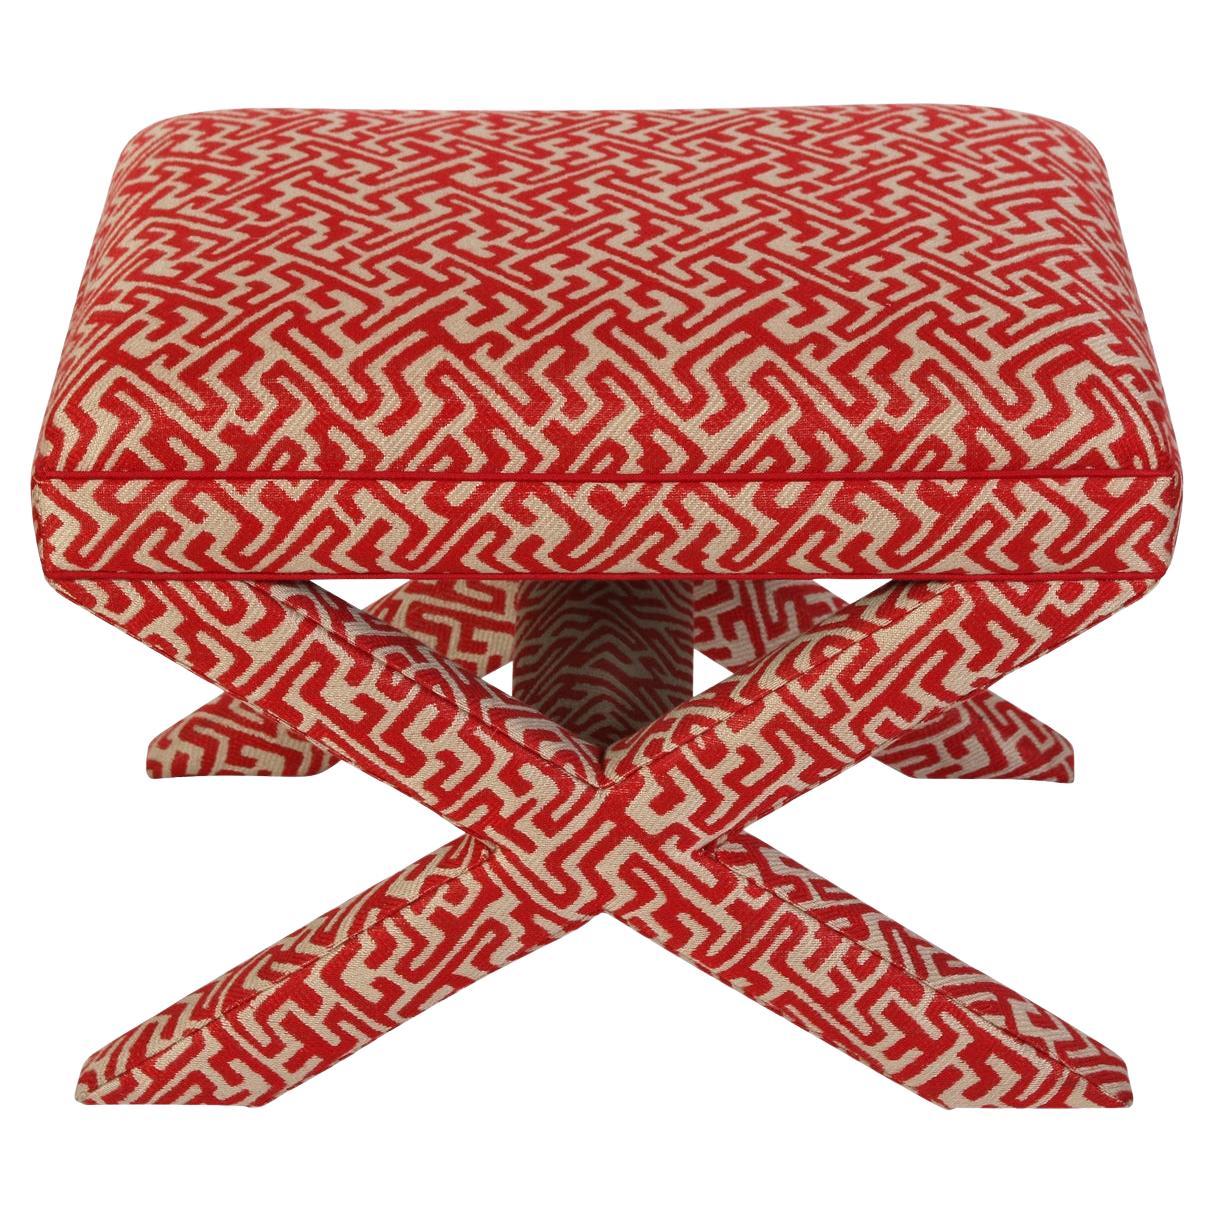 Red and White Ottoman For Sale